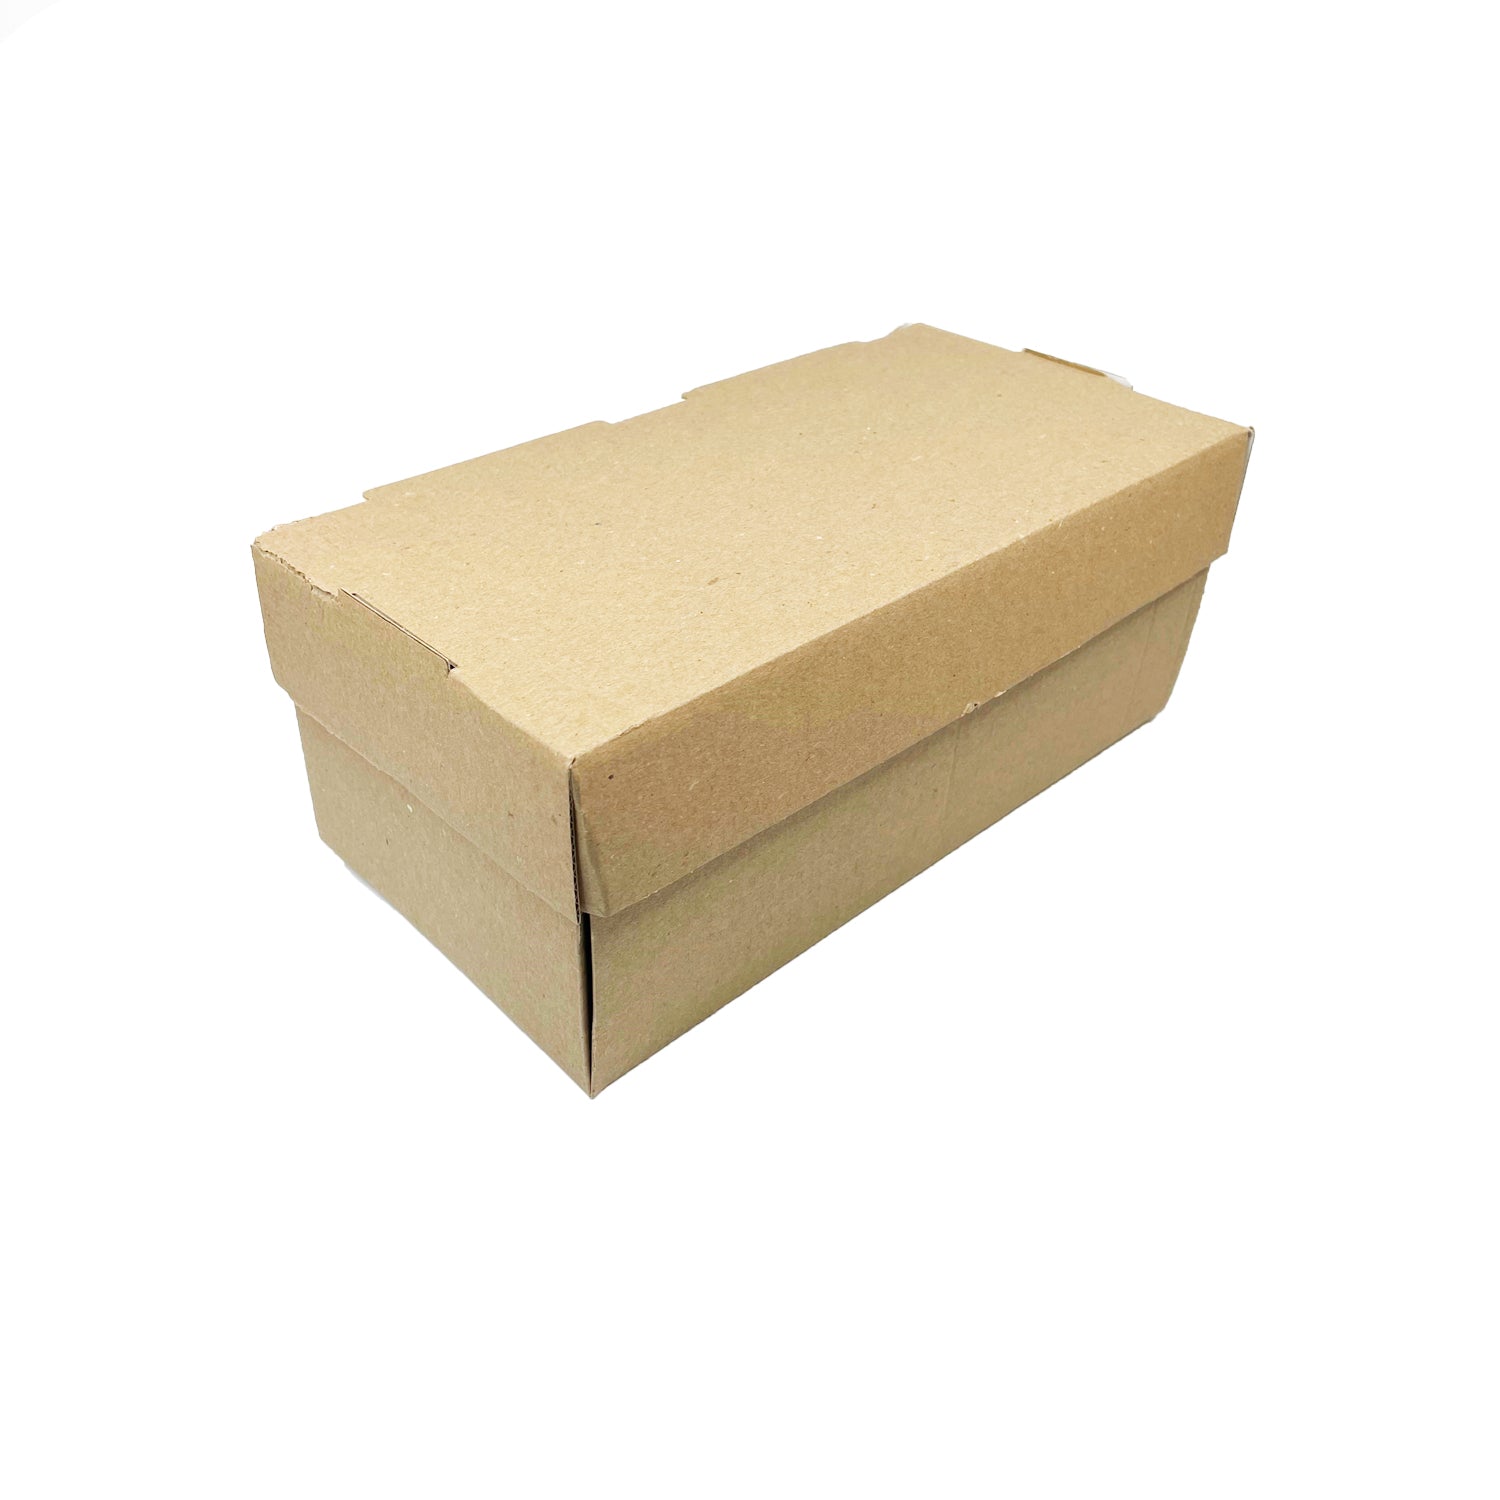 White Burger and Chip Box -100 Pack